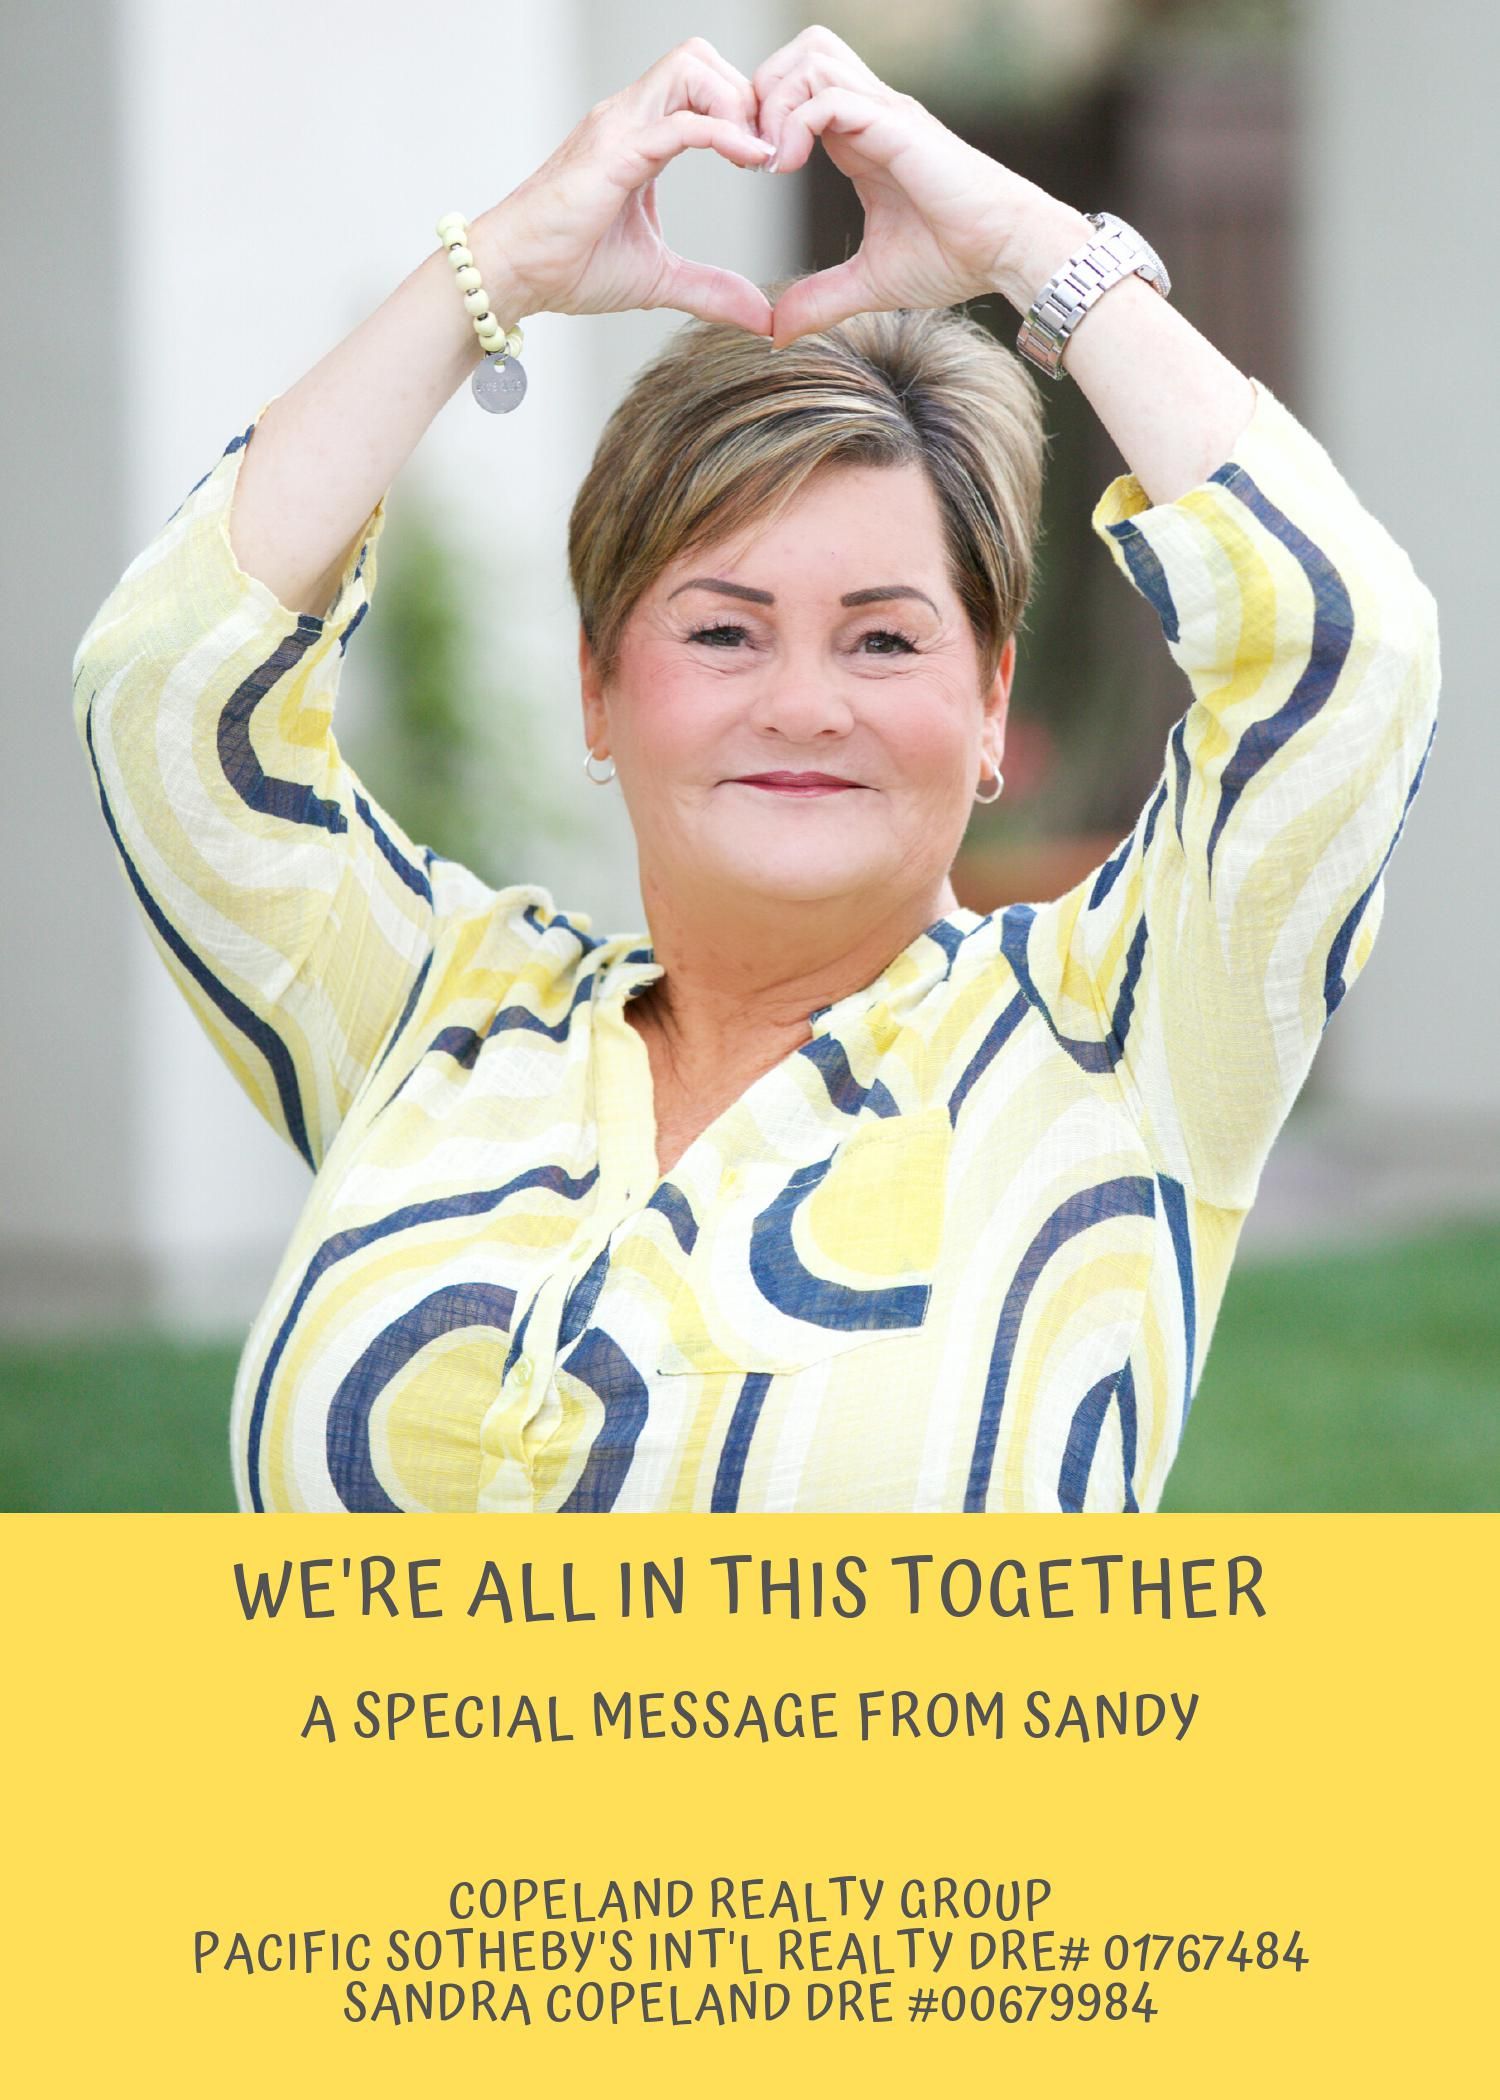 A Special Message from Sandy